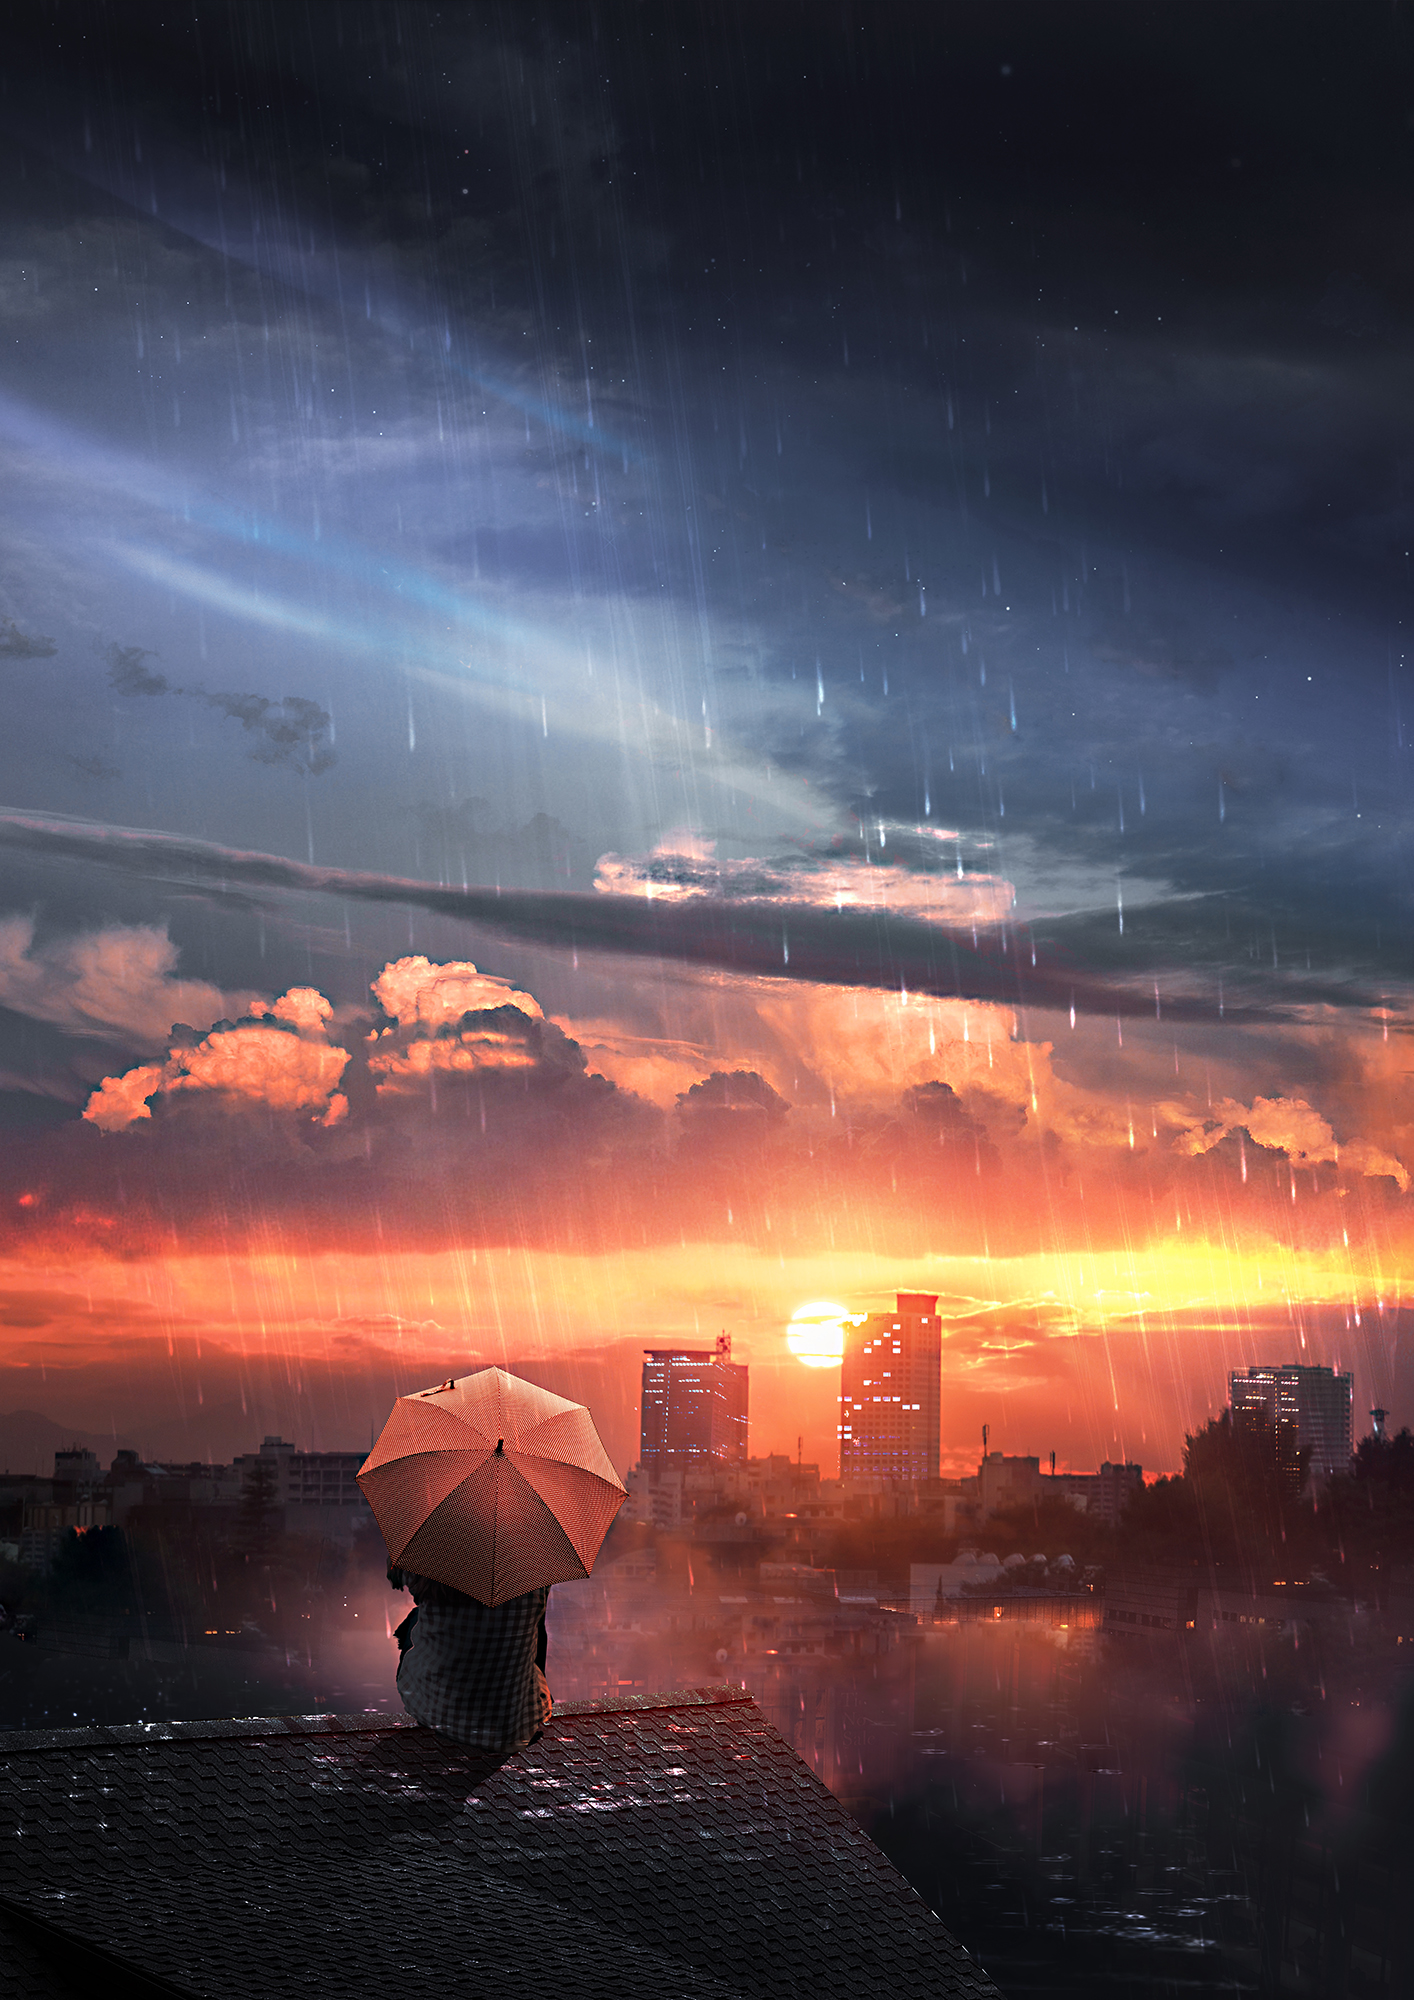 rain, art, loneliness, privacy, night, roof, seclusion, sky, umbrella wallpapers for tablet